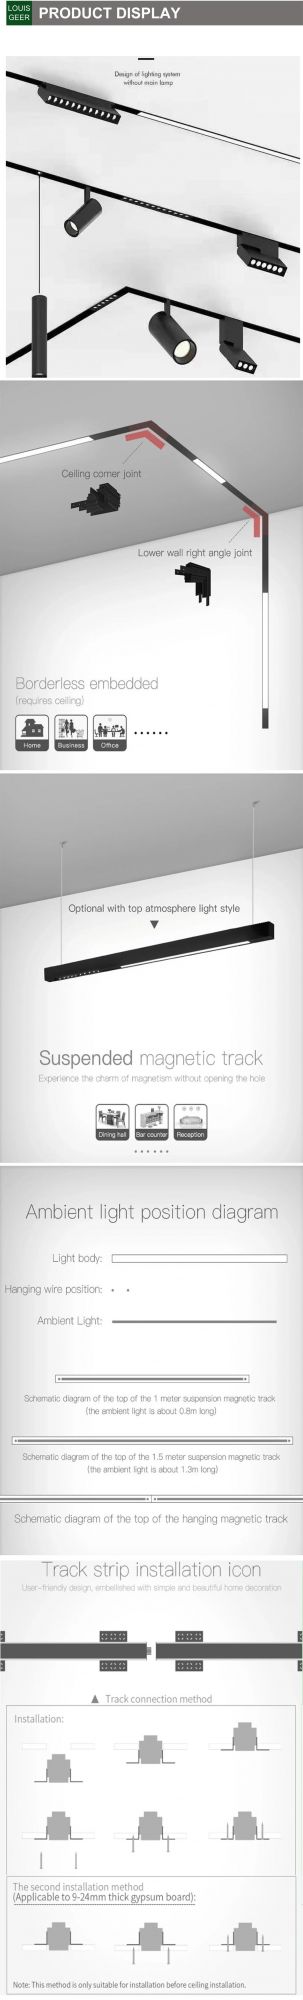 0-10V Dimmable Magnetic Track Lighting System 6W 12W Magnetic Spot Track Light 3000K 4000K 5700K LED Magnet Track Light